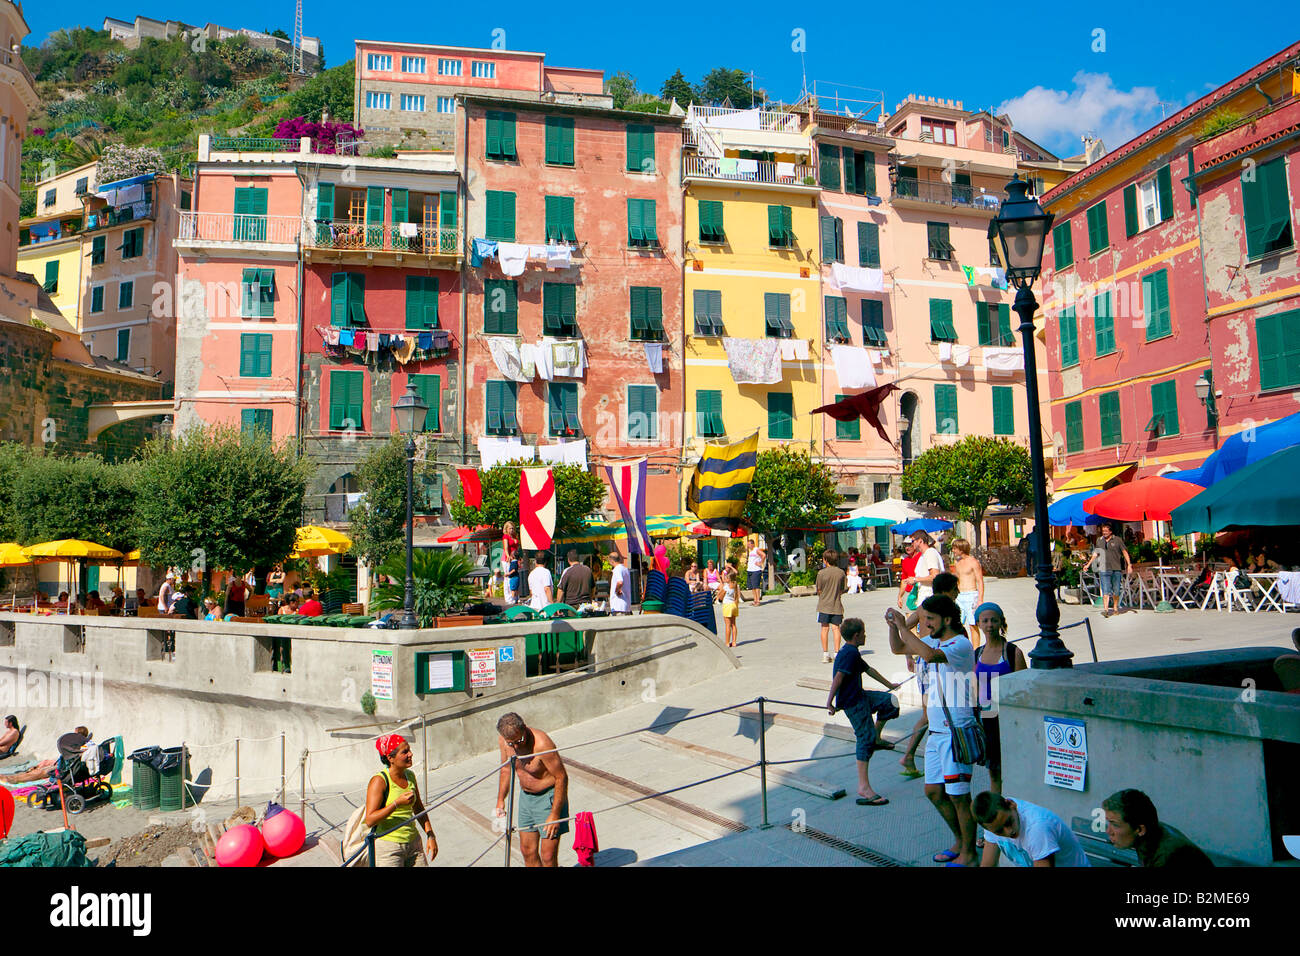 Brightly colored housing of Vernazza, typical of the Cinque Terre region on the northwest coast of Italy. Stock Photo